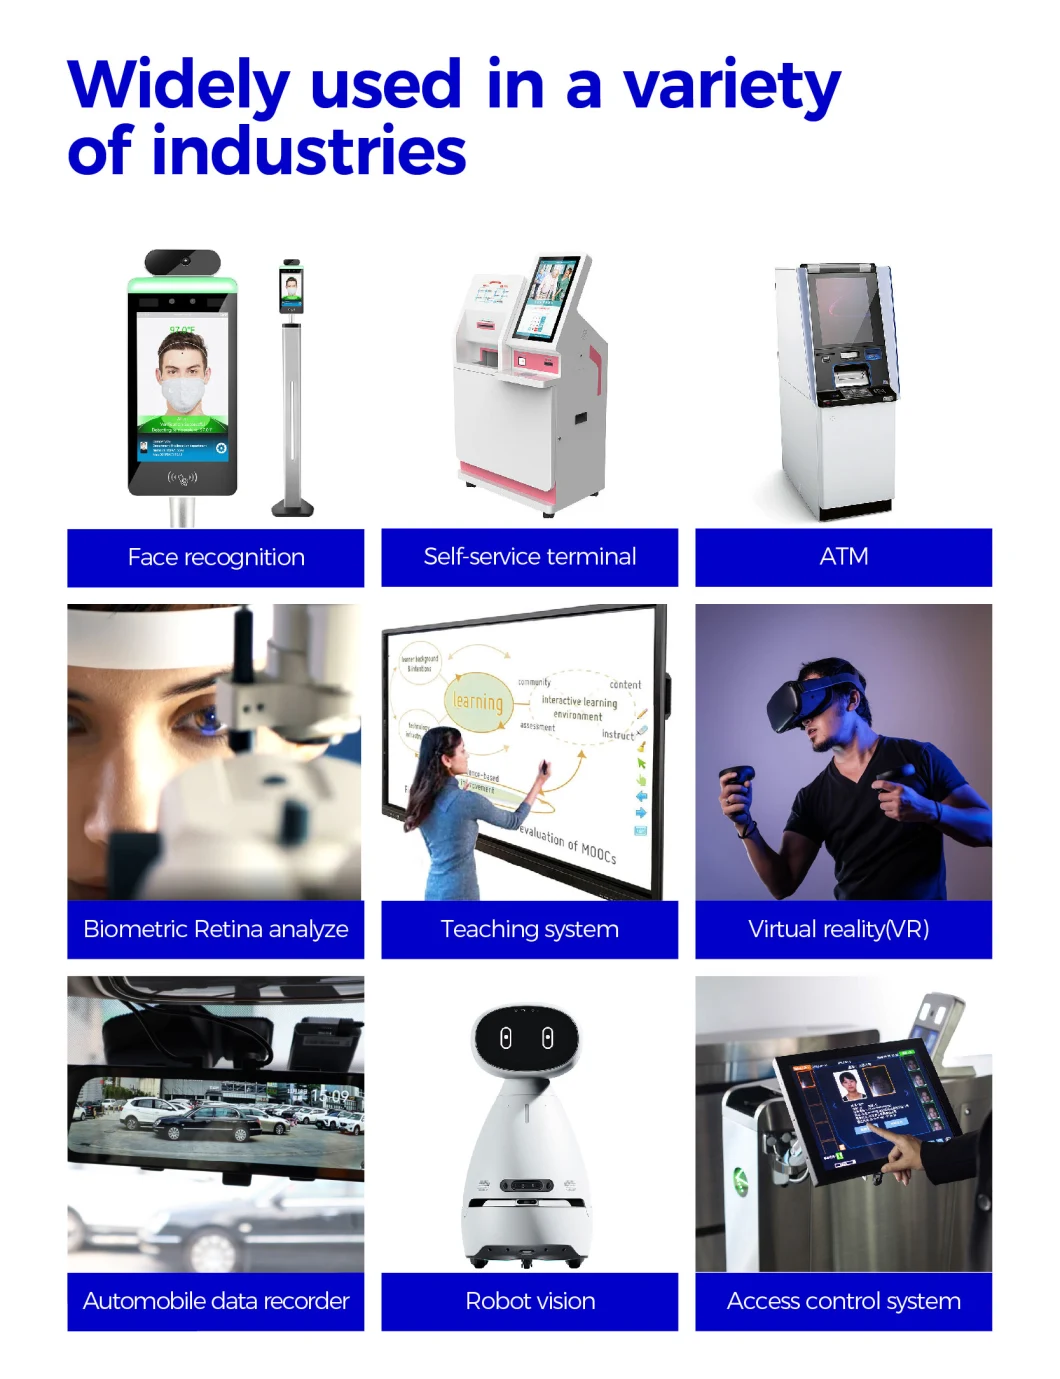 Customized Terminal 2MP Ai Face Recognition 96degree No Distortion Stereo Dual Lens Camera Module for Access Control System